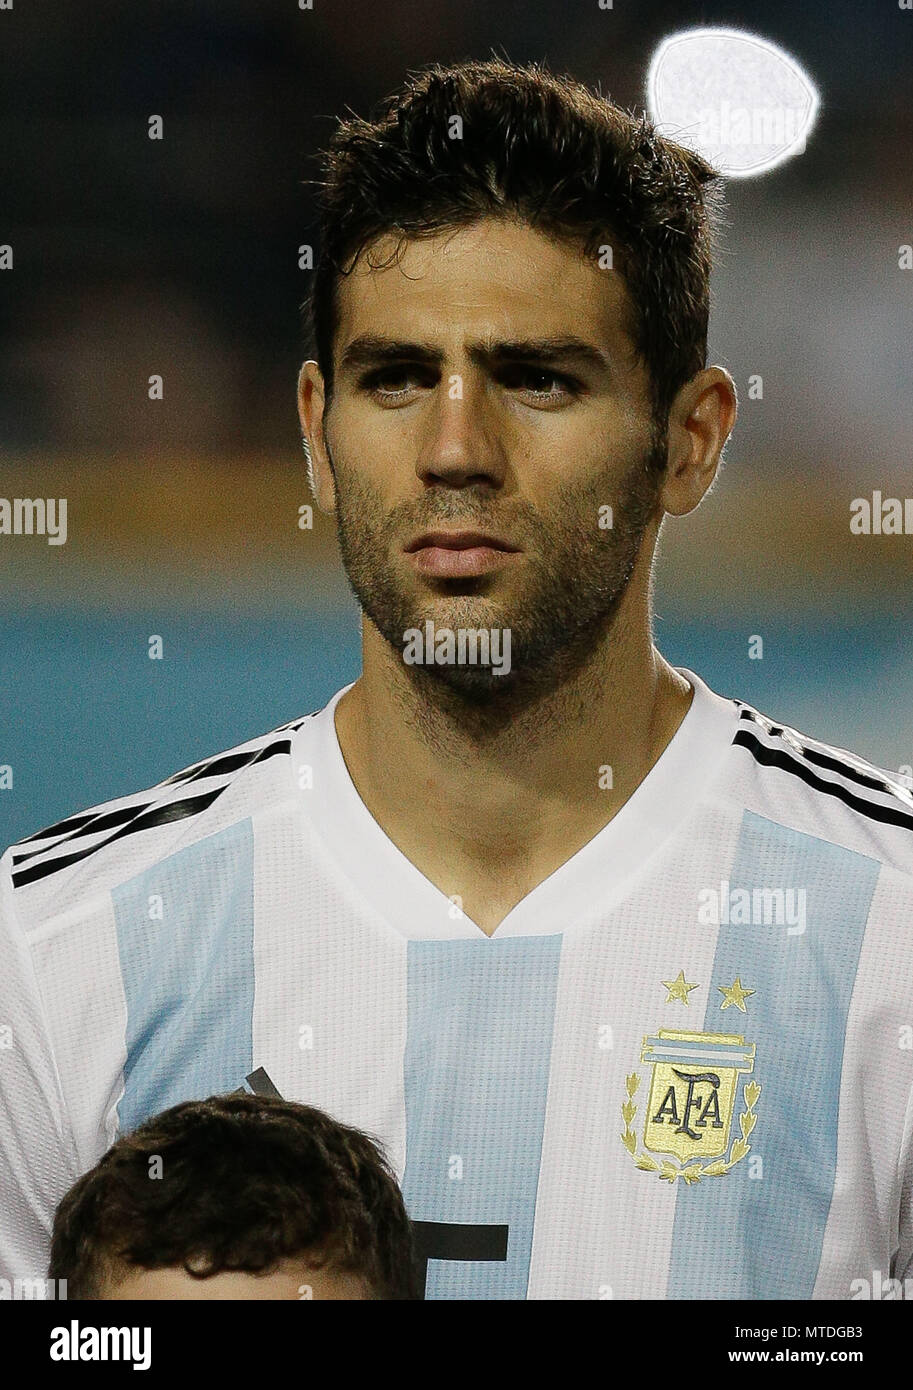 Buenos Aires, Argentina. 29th May, 2018. Lucas Biglia from Argentina during a friendly match between Argentina and Haiti, held at the Alberto José Armando Stadium, known as La Bombonera, located in the neighborhood of La Boca in the capital of Buenos Aires. Credit: Marcelo Machado de Melo/FotoArena/Alamy Live News Stock Photo